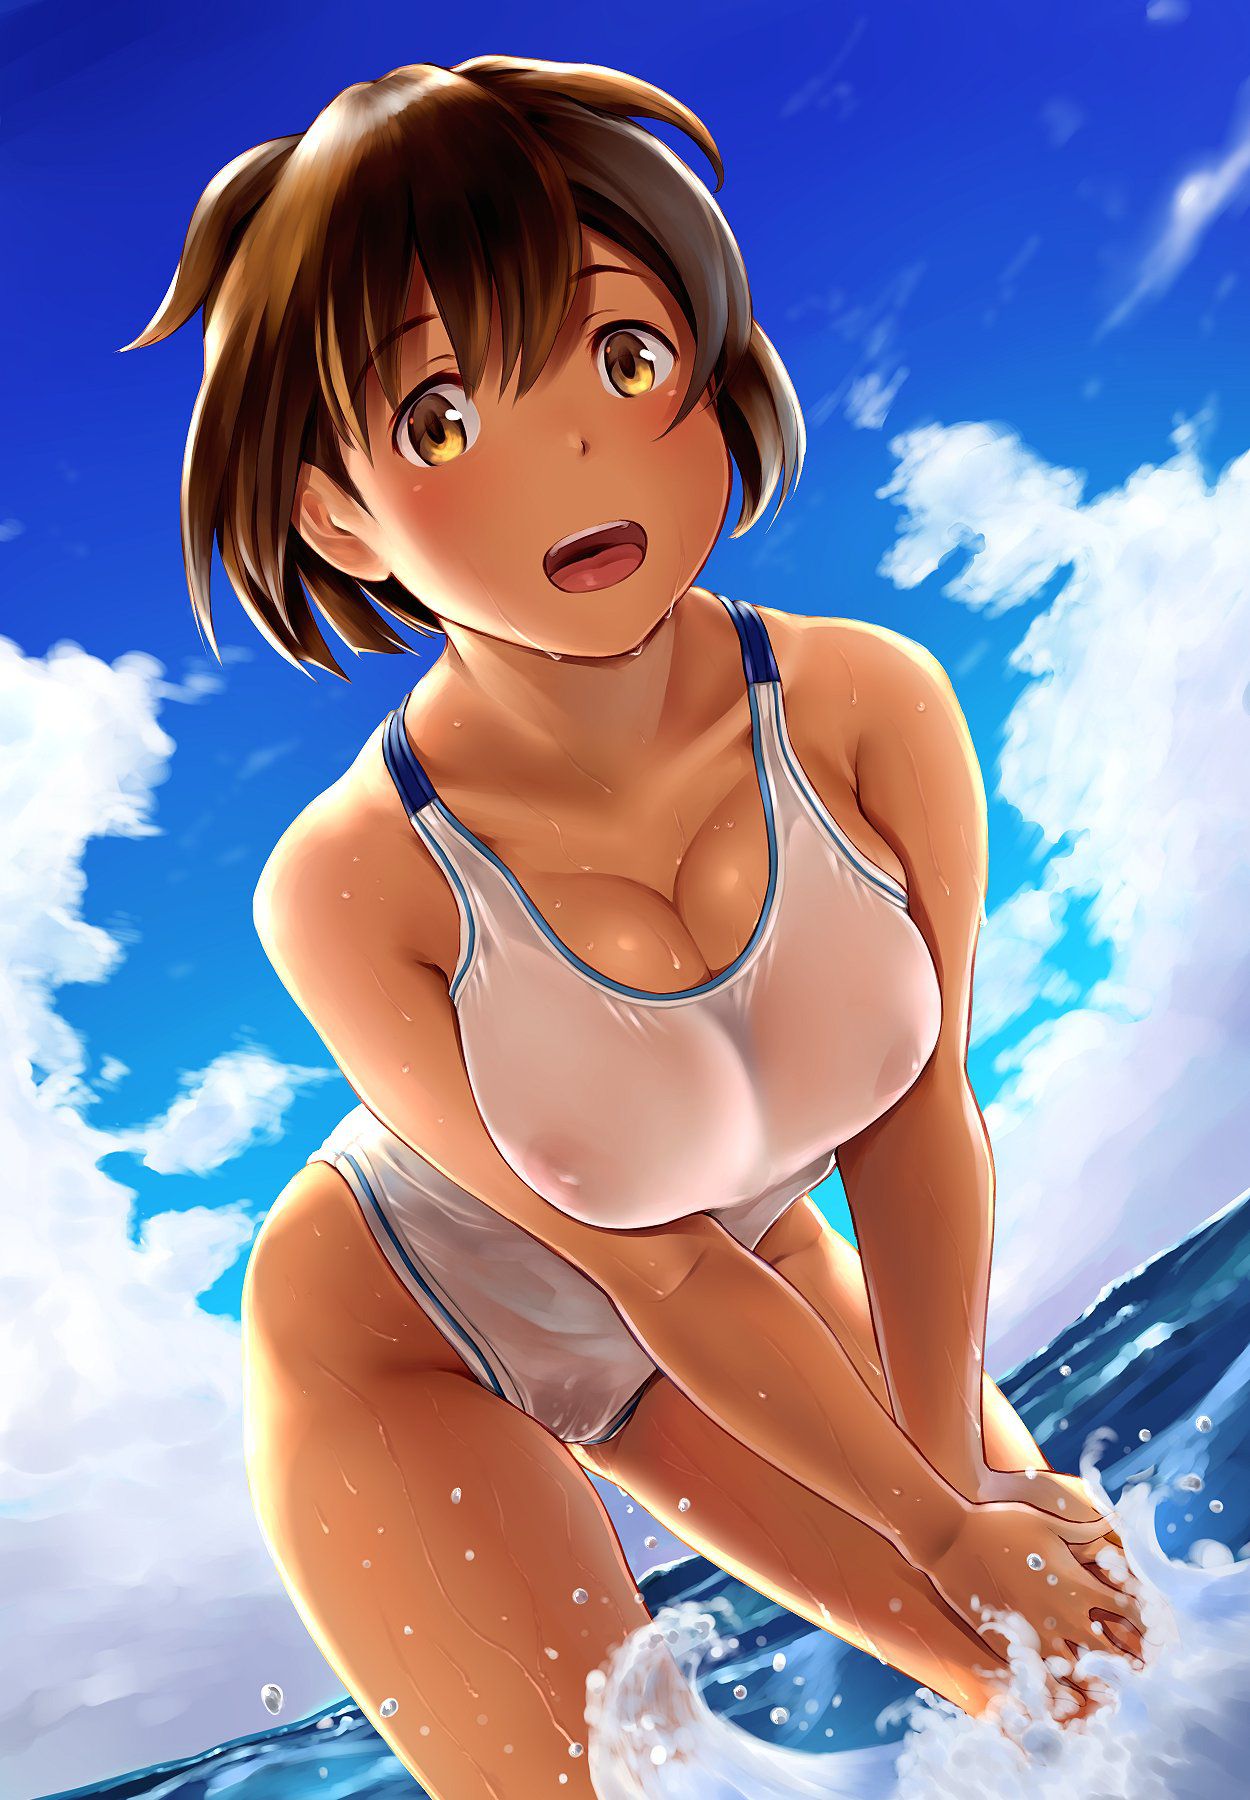 Erotic anime summary Erotic image collection of wet transparent beauties and beautiful girls that are transparent variously [50 sheets] 50